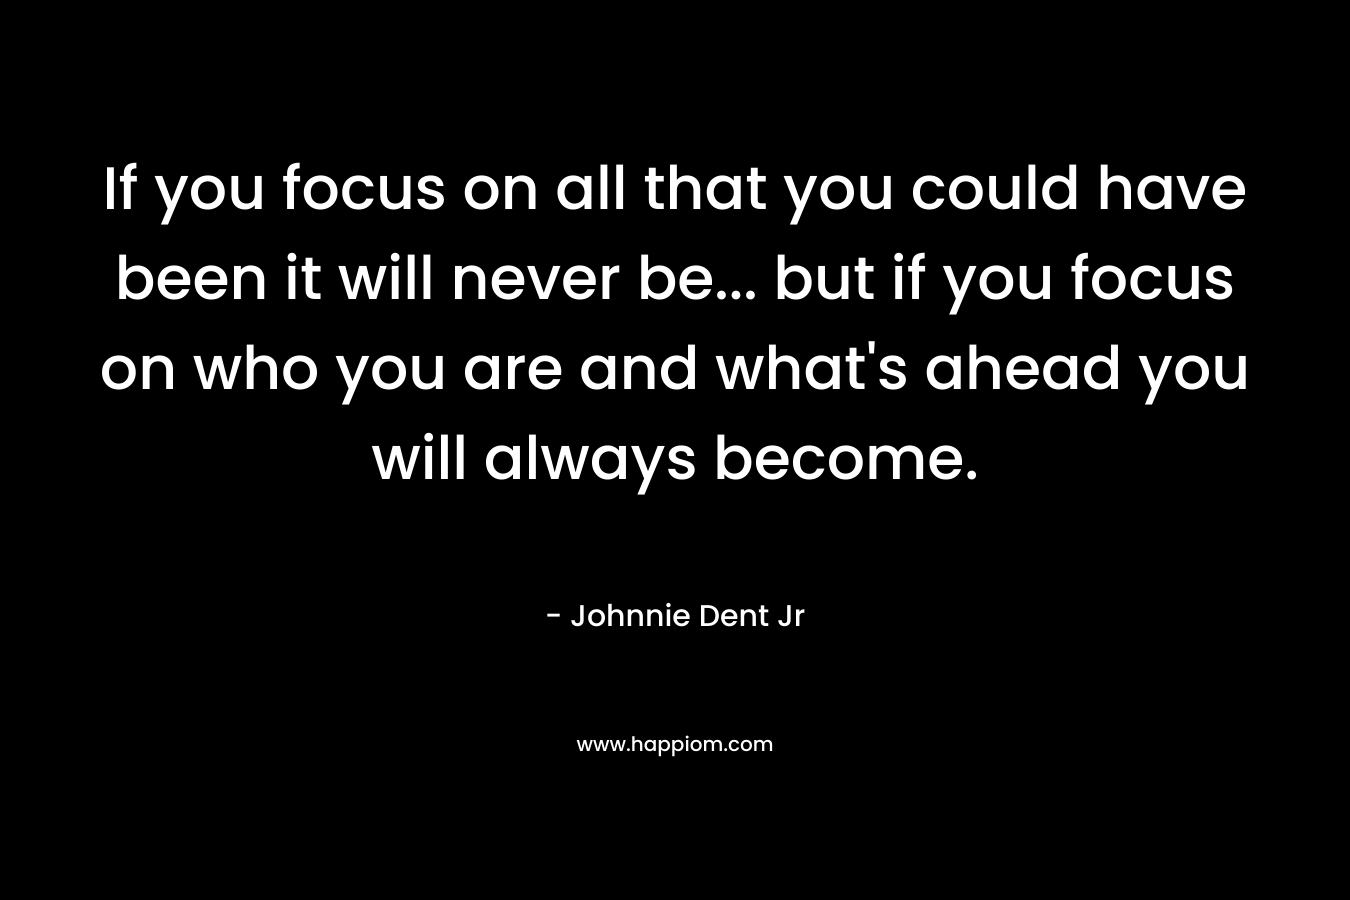 If you focus on all that you could have been it will never be... but if you focus on who you are and what's ahead you will always become.